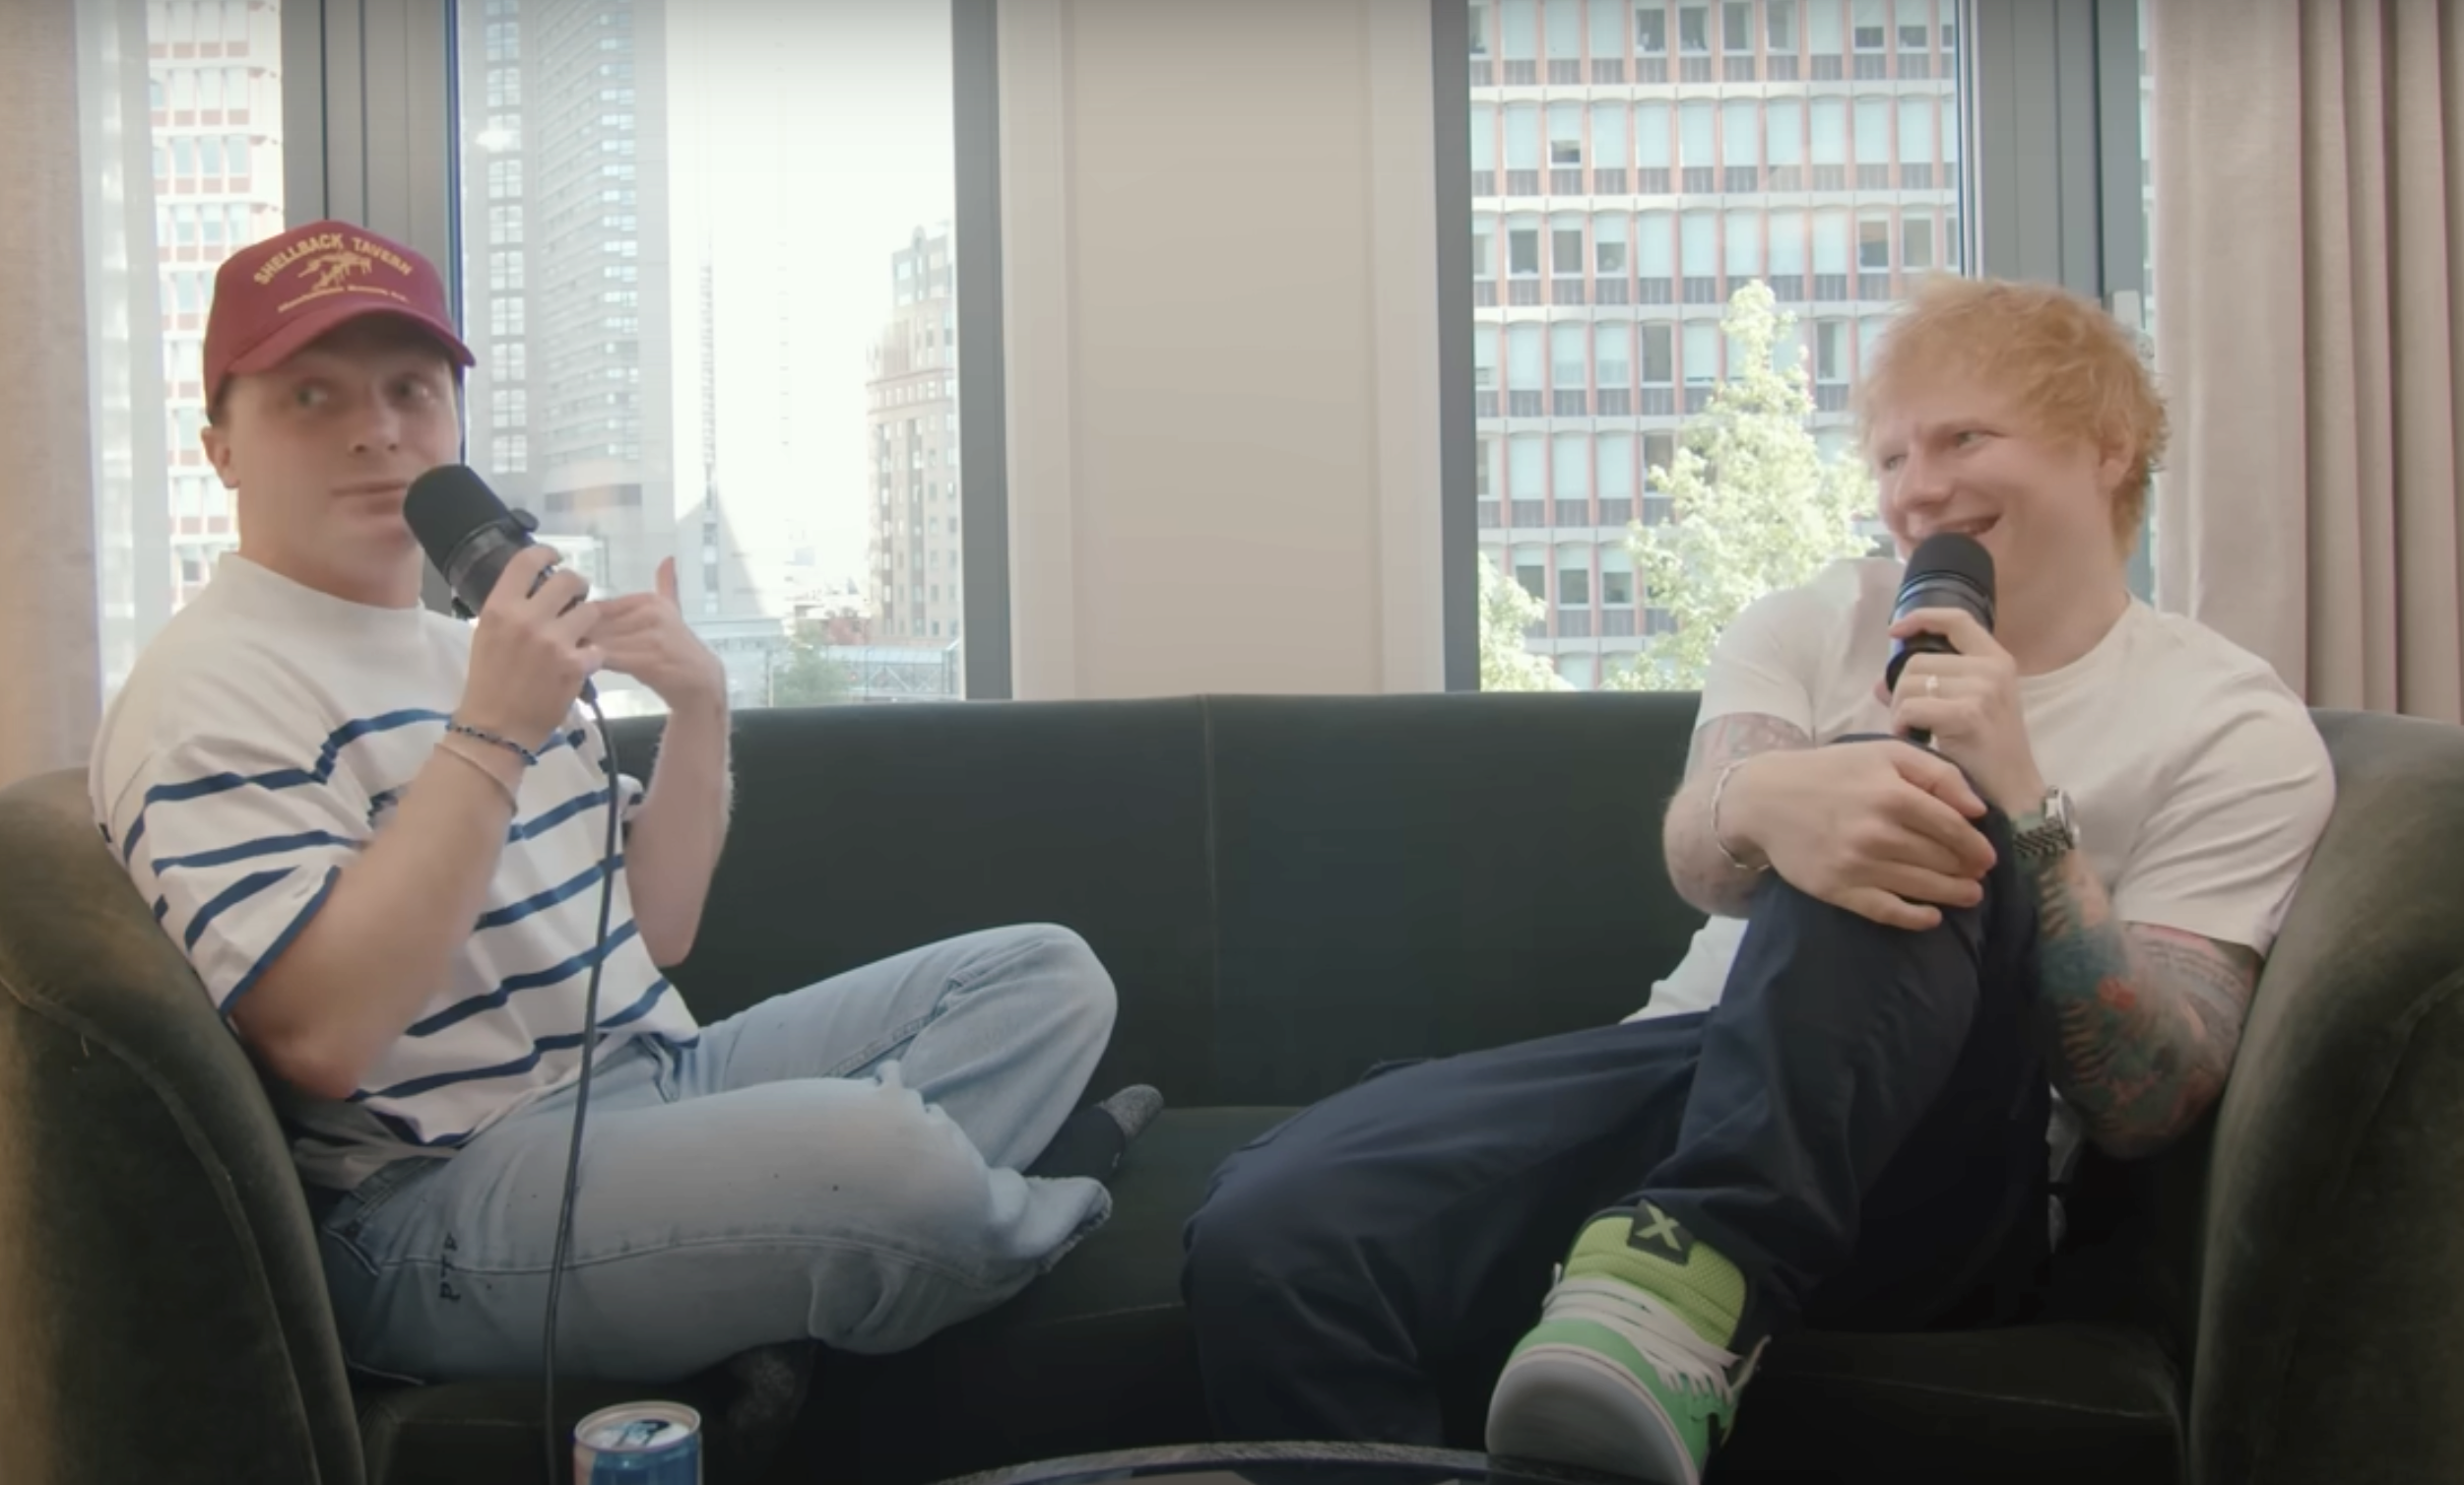 Ed Sheeran and Jake Shane sit on a couch during their interview